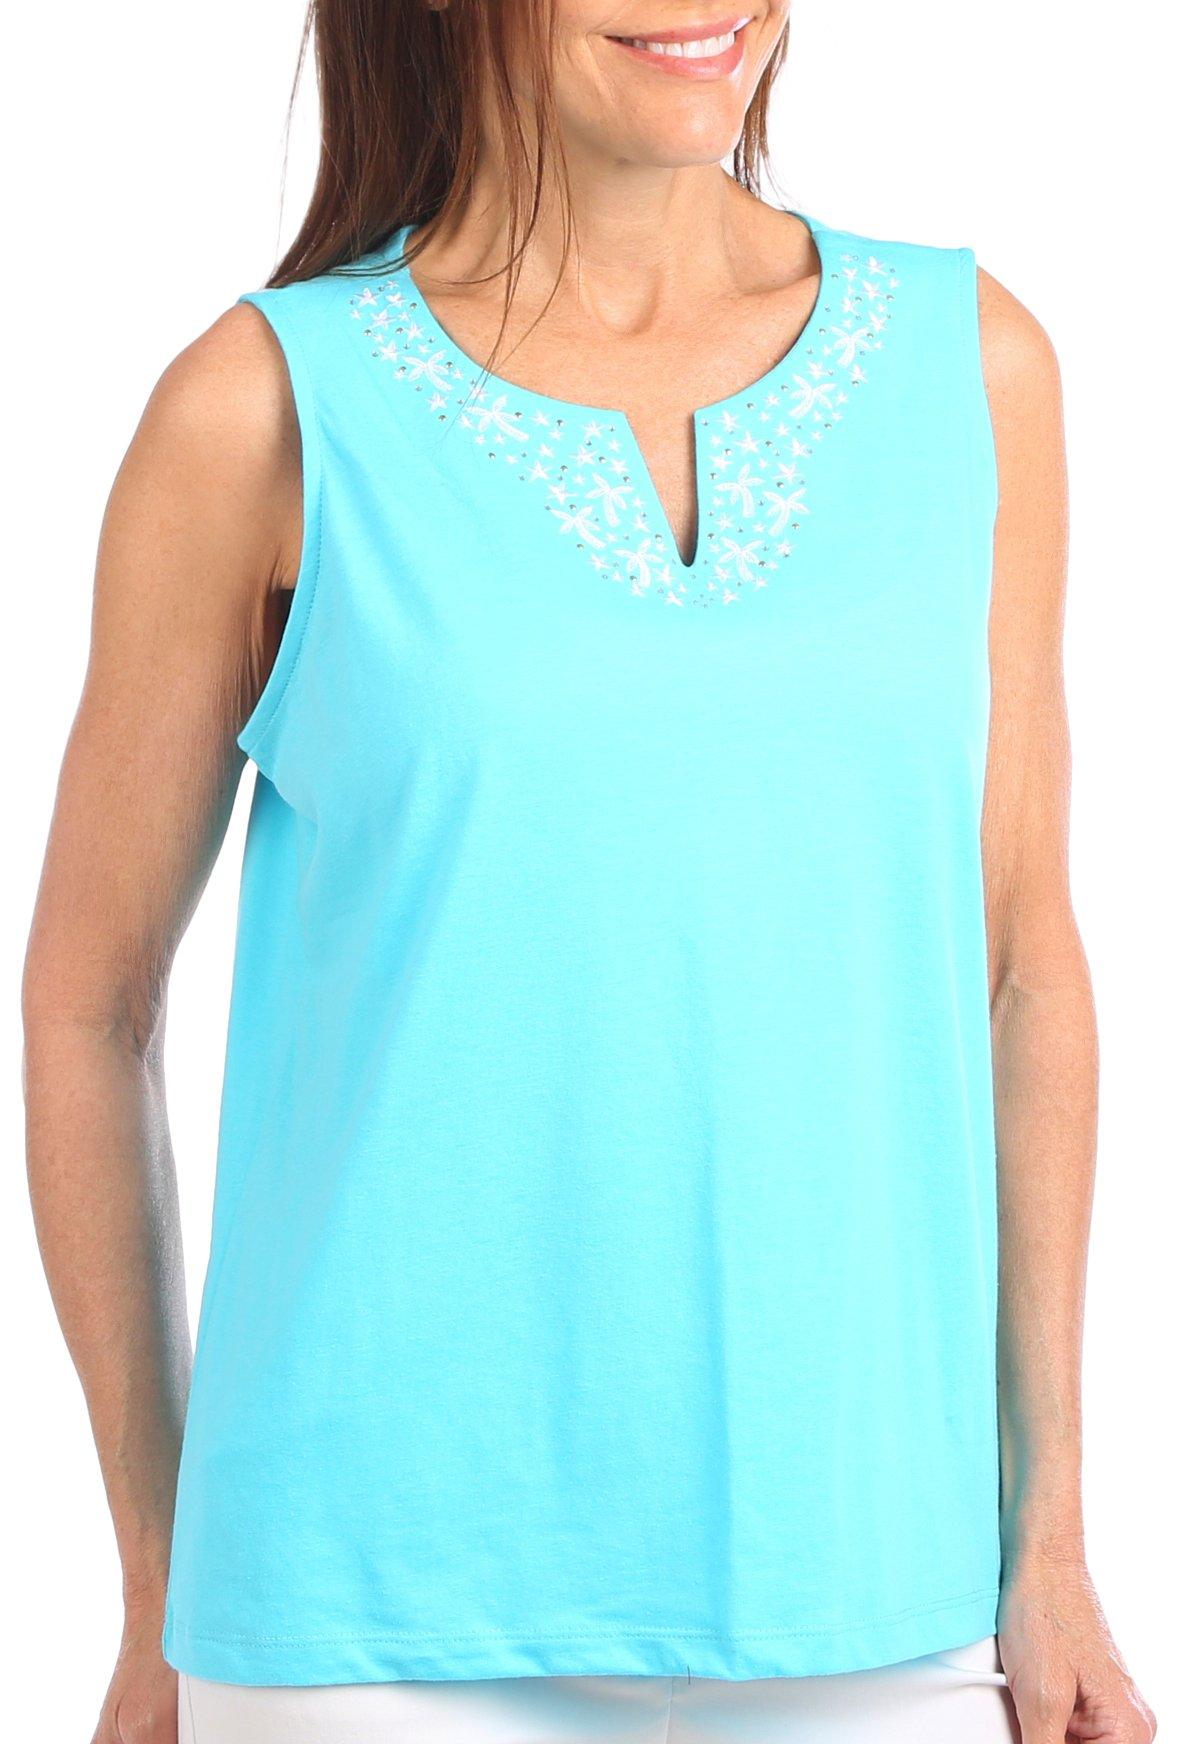 Coral Bay Petite Sleeveless Embroidered Notch Neckline Top